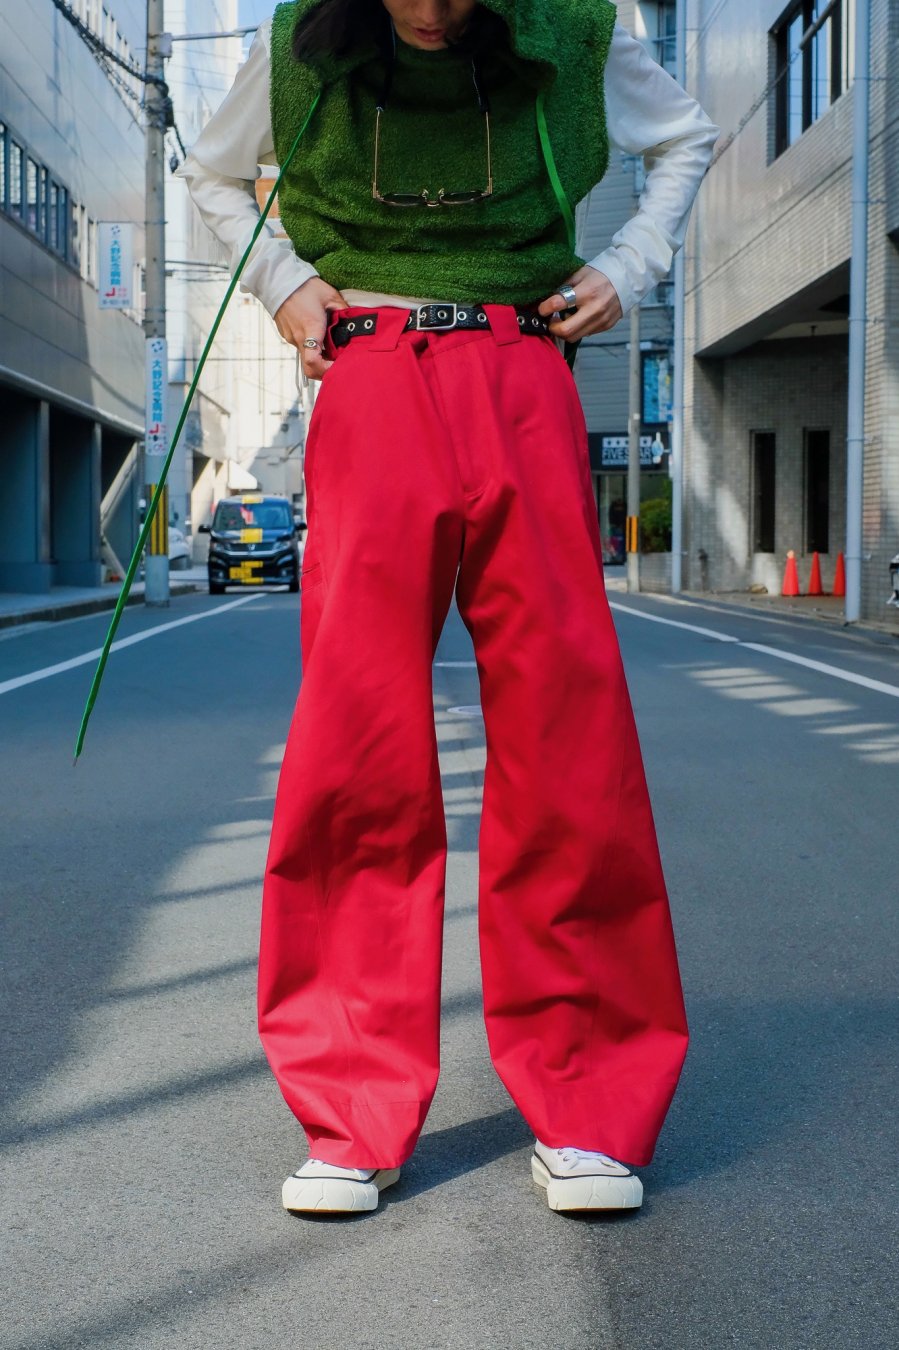 MASU（エムエーエスユー）のCOTTON WIDE TROUSERS REDの通販サイト